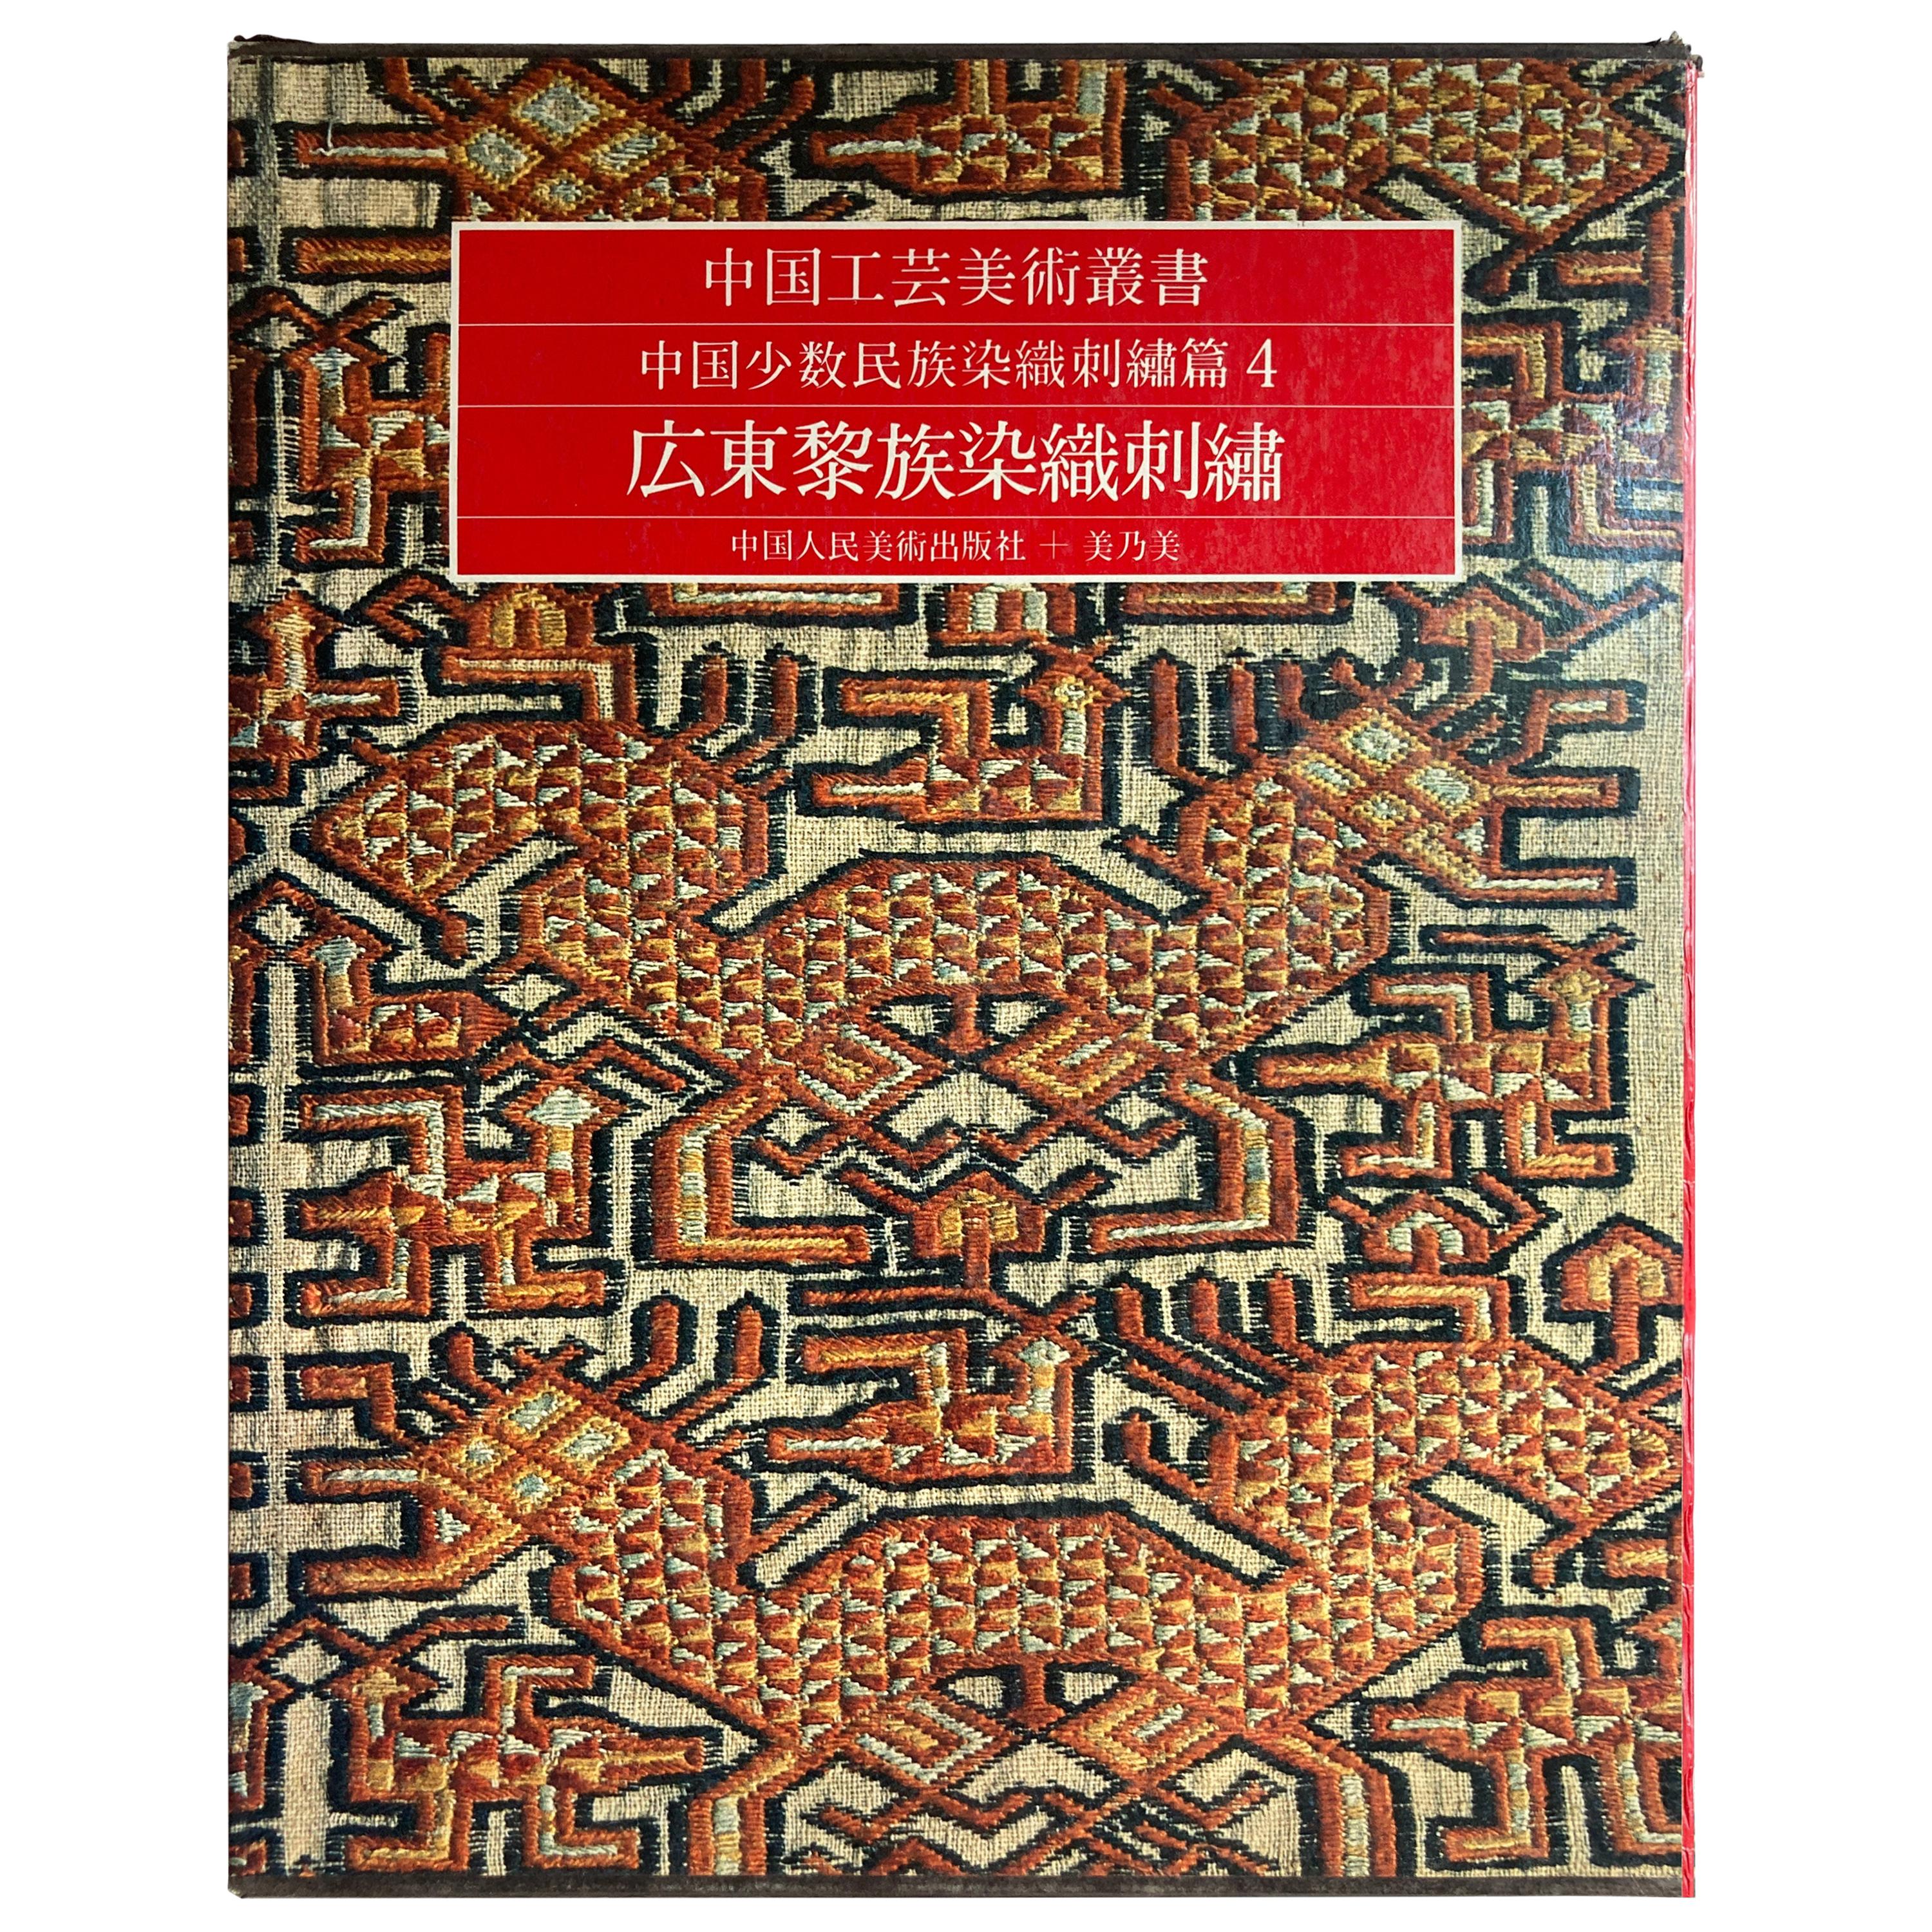 Chinese Antique Textiles and Embroidery Edition in Chinese For Sale